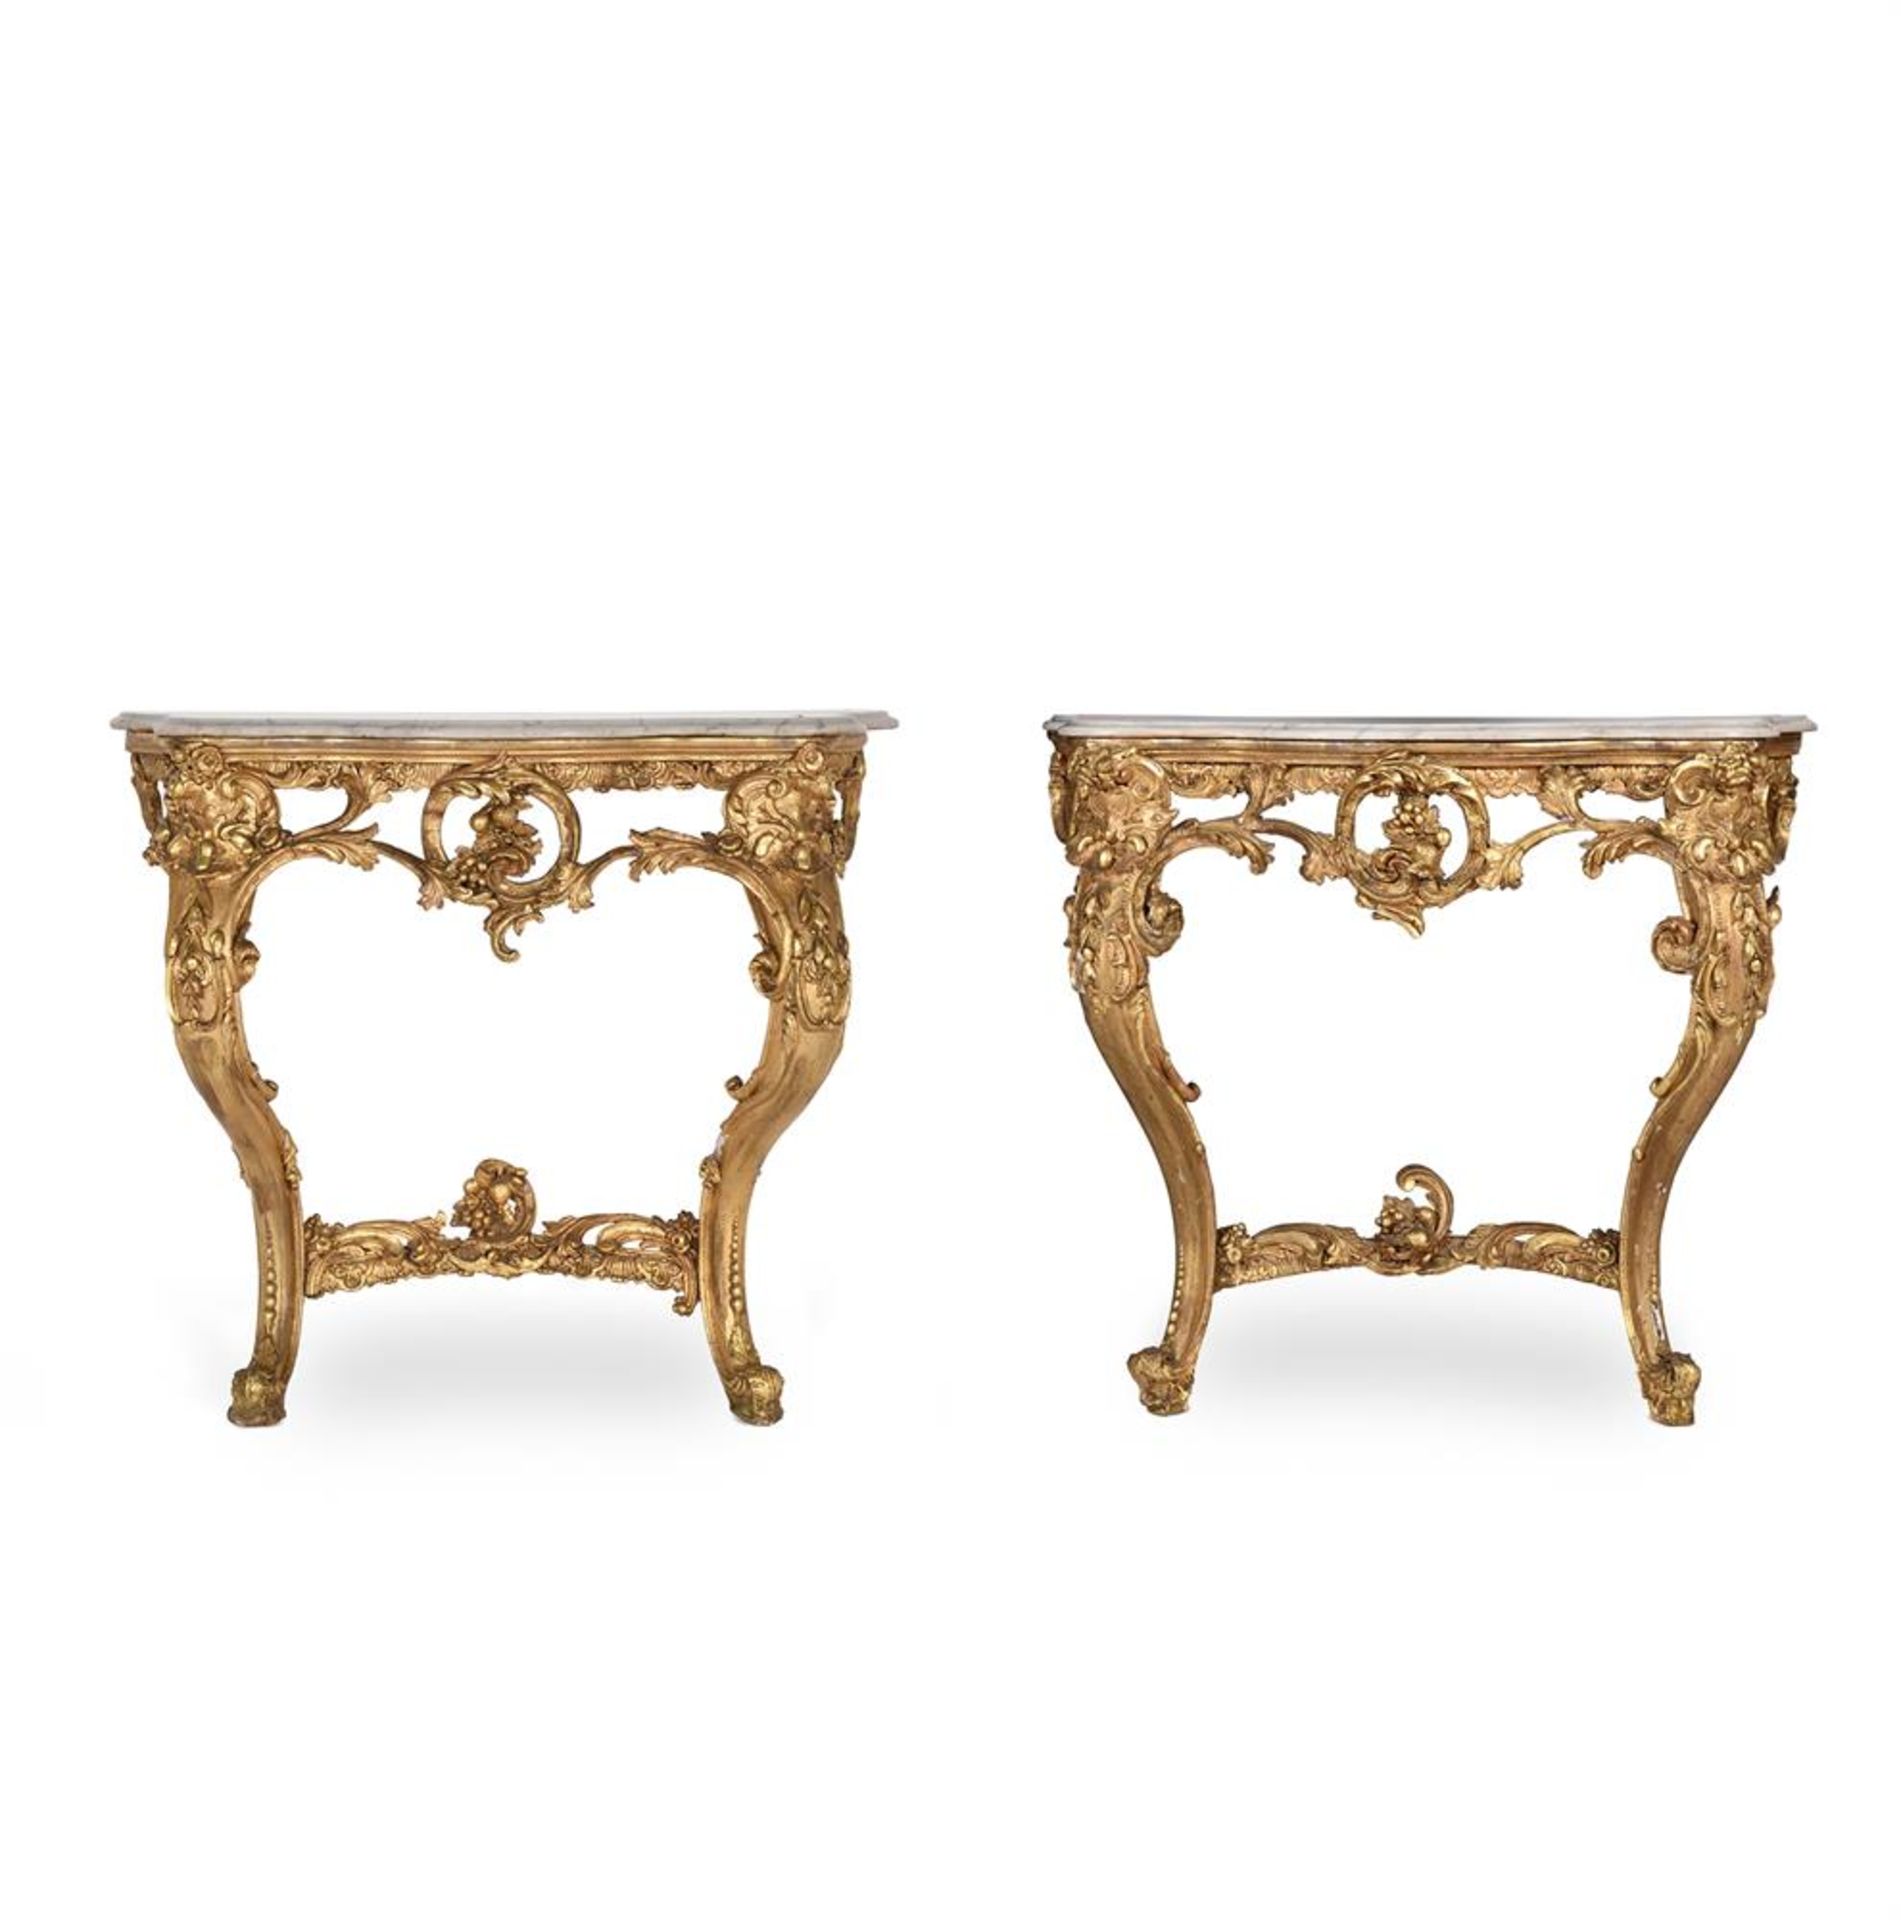 A PAIR OF LOUIS XV STYLE GILTWOOD AND GESSO CONSOLE TABLES, FIRST HALF 19TH CENTURY